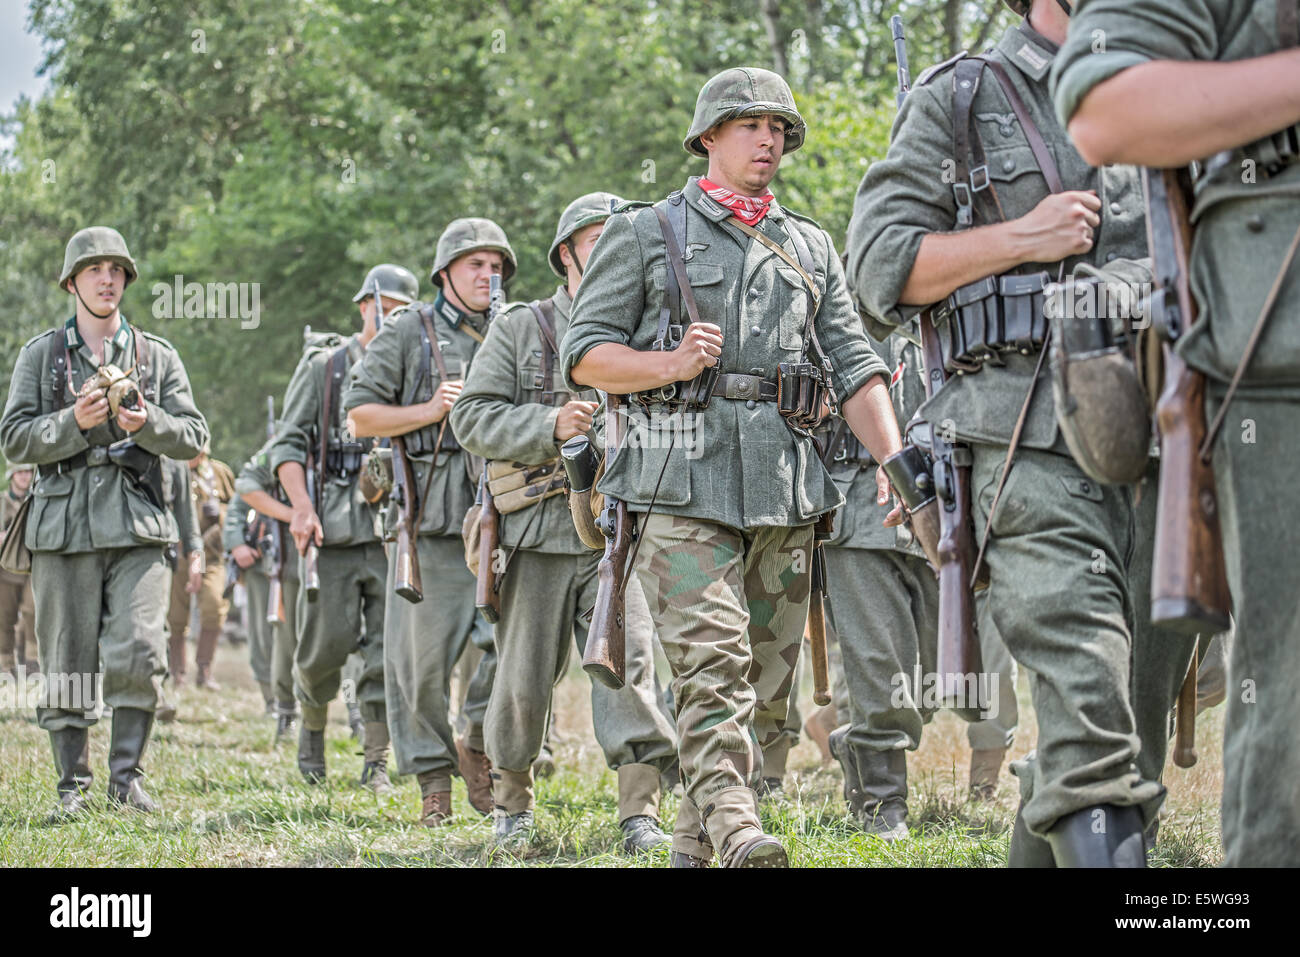 German soldiers marching on battlefield during reenactment of World War II fight Stock Photo